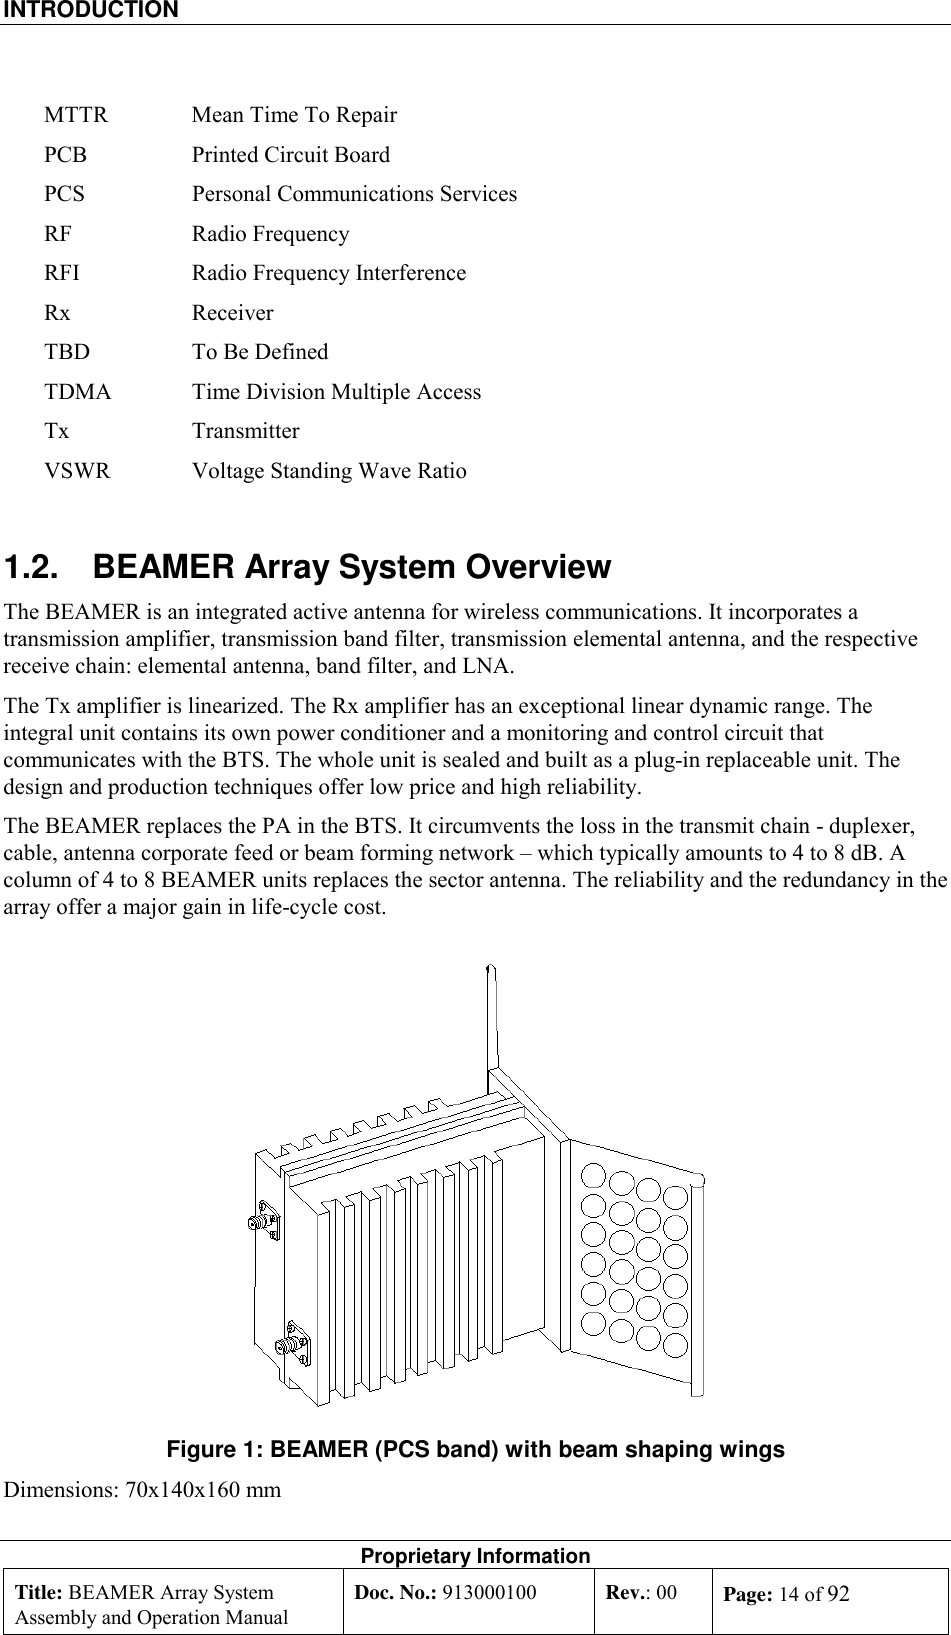 INTRODUCTION    Proprietary Information Title: BEAMER Array System Assembly and Operation Manual Doc. No.: 913000100  Rev.: 00  Page: 14 of 92  MTTR  Mean Time To Repair PCB  Printed Circuit Board PCS  Personal Communications Services RF Radio Frequency RFI  Radio Frequency Interference Rx Receiver TBD  To Be Defined TDMA  Time Division Multiple Access Tx Transmitter VSWR  Voltage Standing Wave Ratio 1.2.  BEAMER Array System Overview The BEAMER is an integrated active antenna for wireless communications. It incorporates a transmission amplifier, transmission band filter, transmission elemental antenna, and the respective receive chain: elemental antenna, band filter, and LNA.  The Tx amplifier is linearized. The Rx amplifier has an exceptional linear dynamic range. The integral unit contains its own power conditioner and a monitoring and control circuit that communicates with the BTS. The whole unit is sealed and built as a plug-in replaceable unit. The design and production techniques offer low price and high reliability. The BEAMER replaces the PA in the BTS. It circumvents the loss in the transmit chain - duplexer, cable, antenna corporate feed or beam forming network – which typically amounts to 4 to 8 dB. A column of 4 to 8 BEAMER units replaces the sector antenna. The reliability and the redundancy in the array offer a major gain in life-cycle cost.  Figure 1: BEAMER (PCS band) with beam shaping wings Dimensions: 70x140x160 mm 